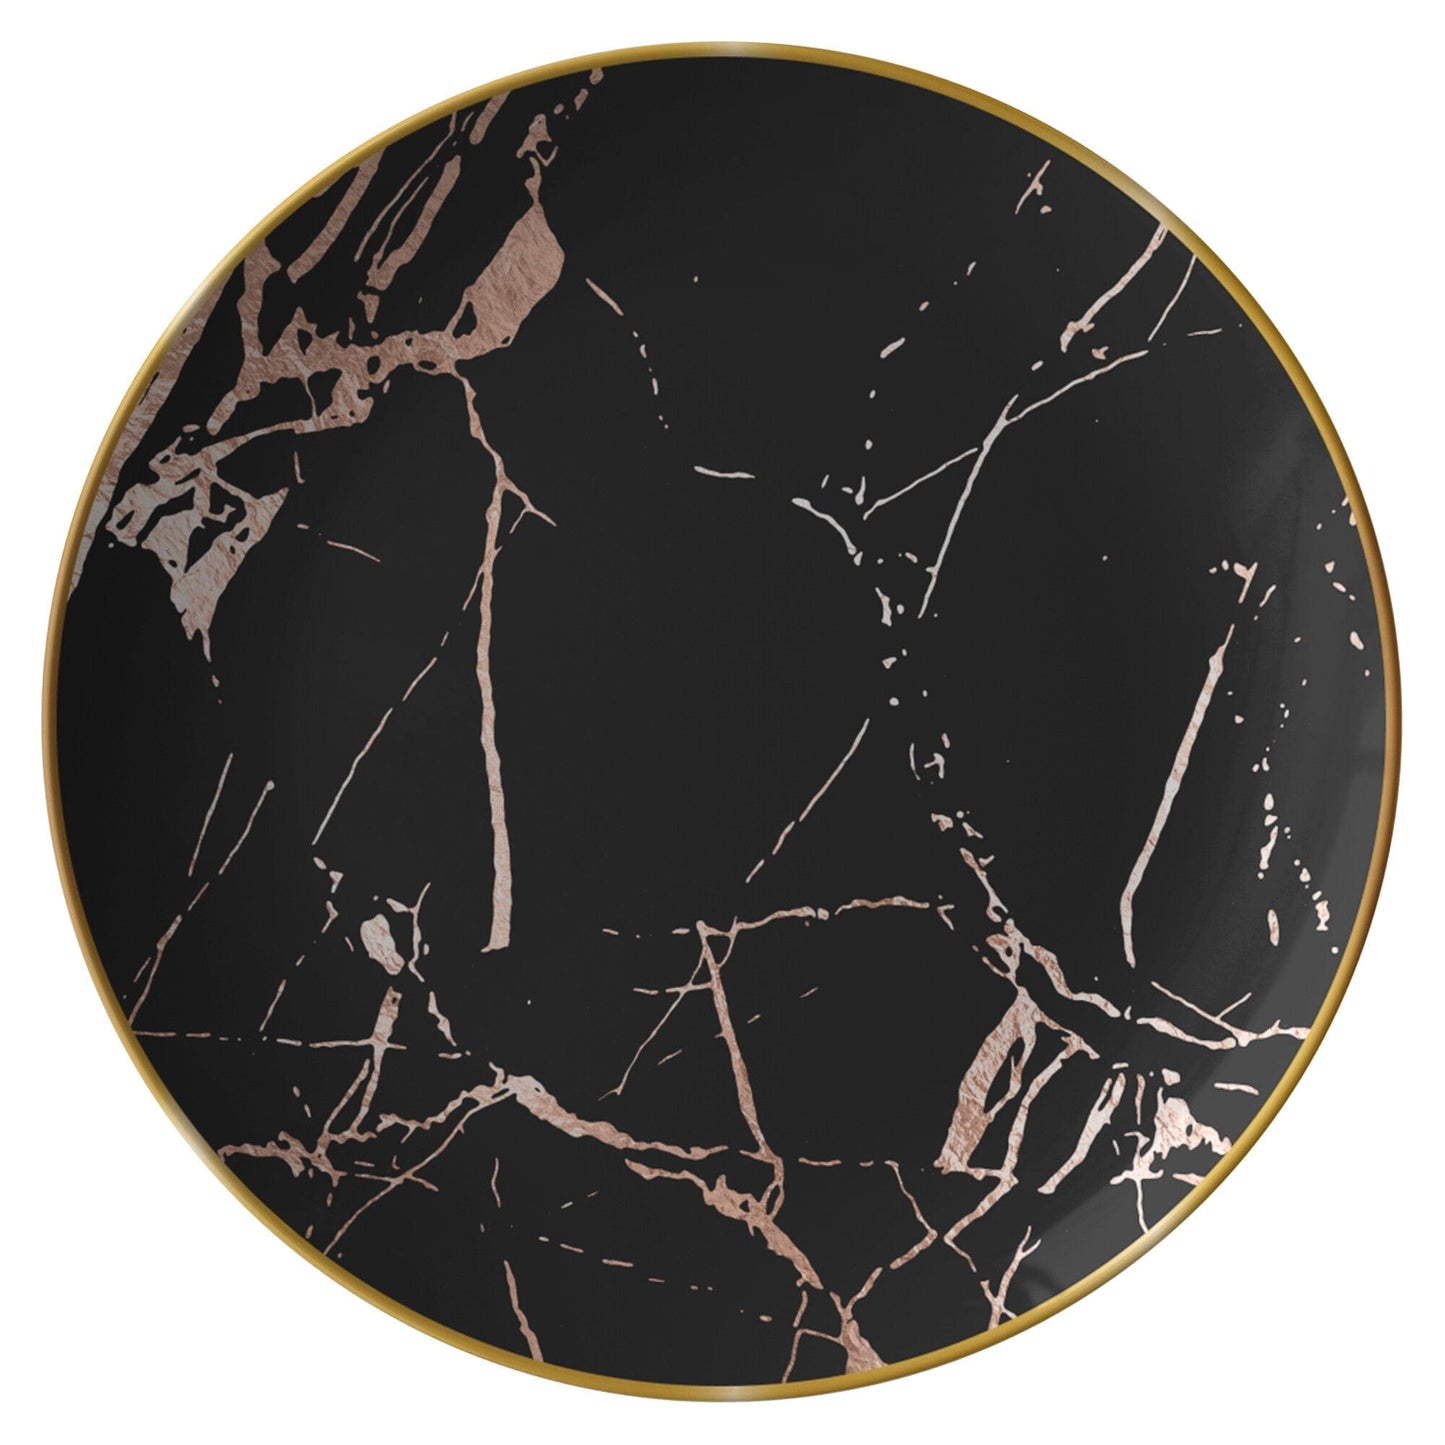 Kate McEnroe New York Dinner Plates in Luxurious Black & Gold Marble Veins with Gold Rim Plates